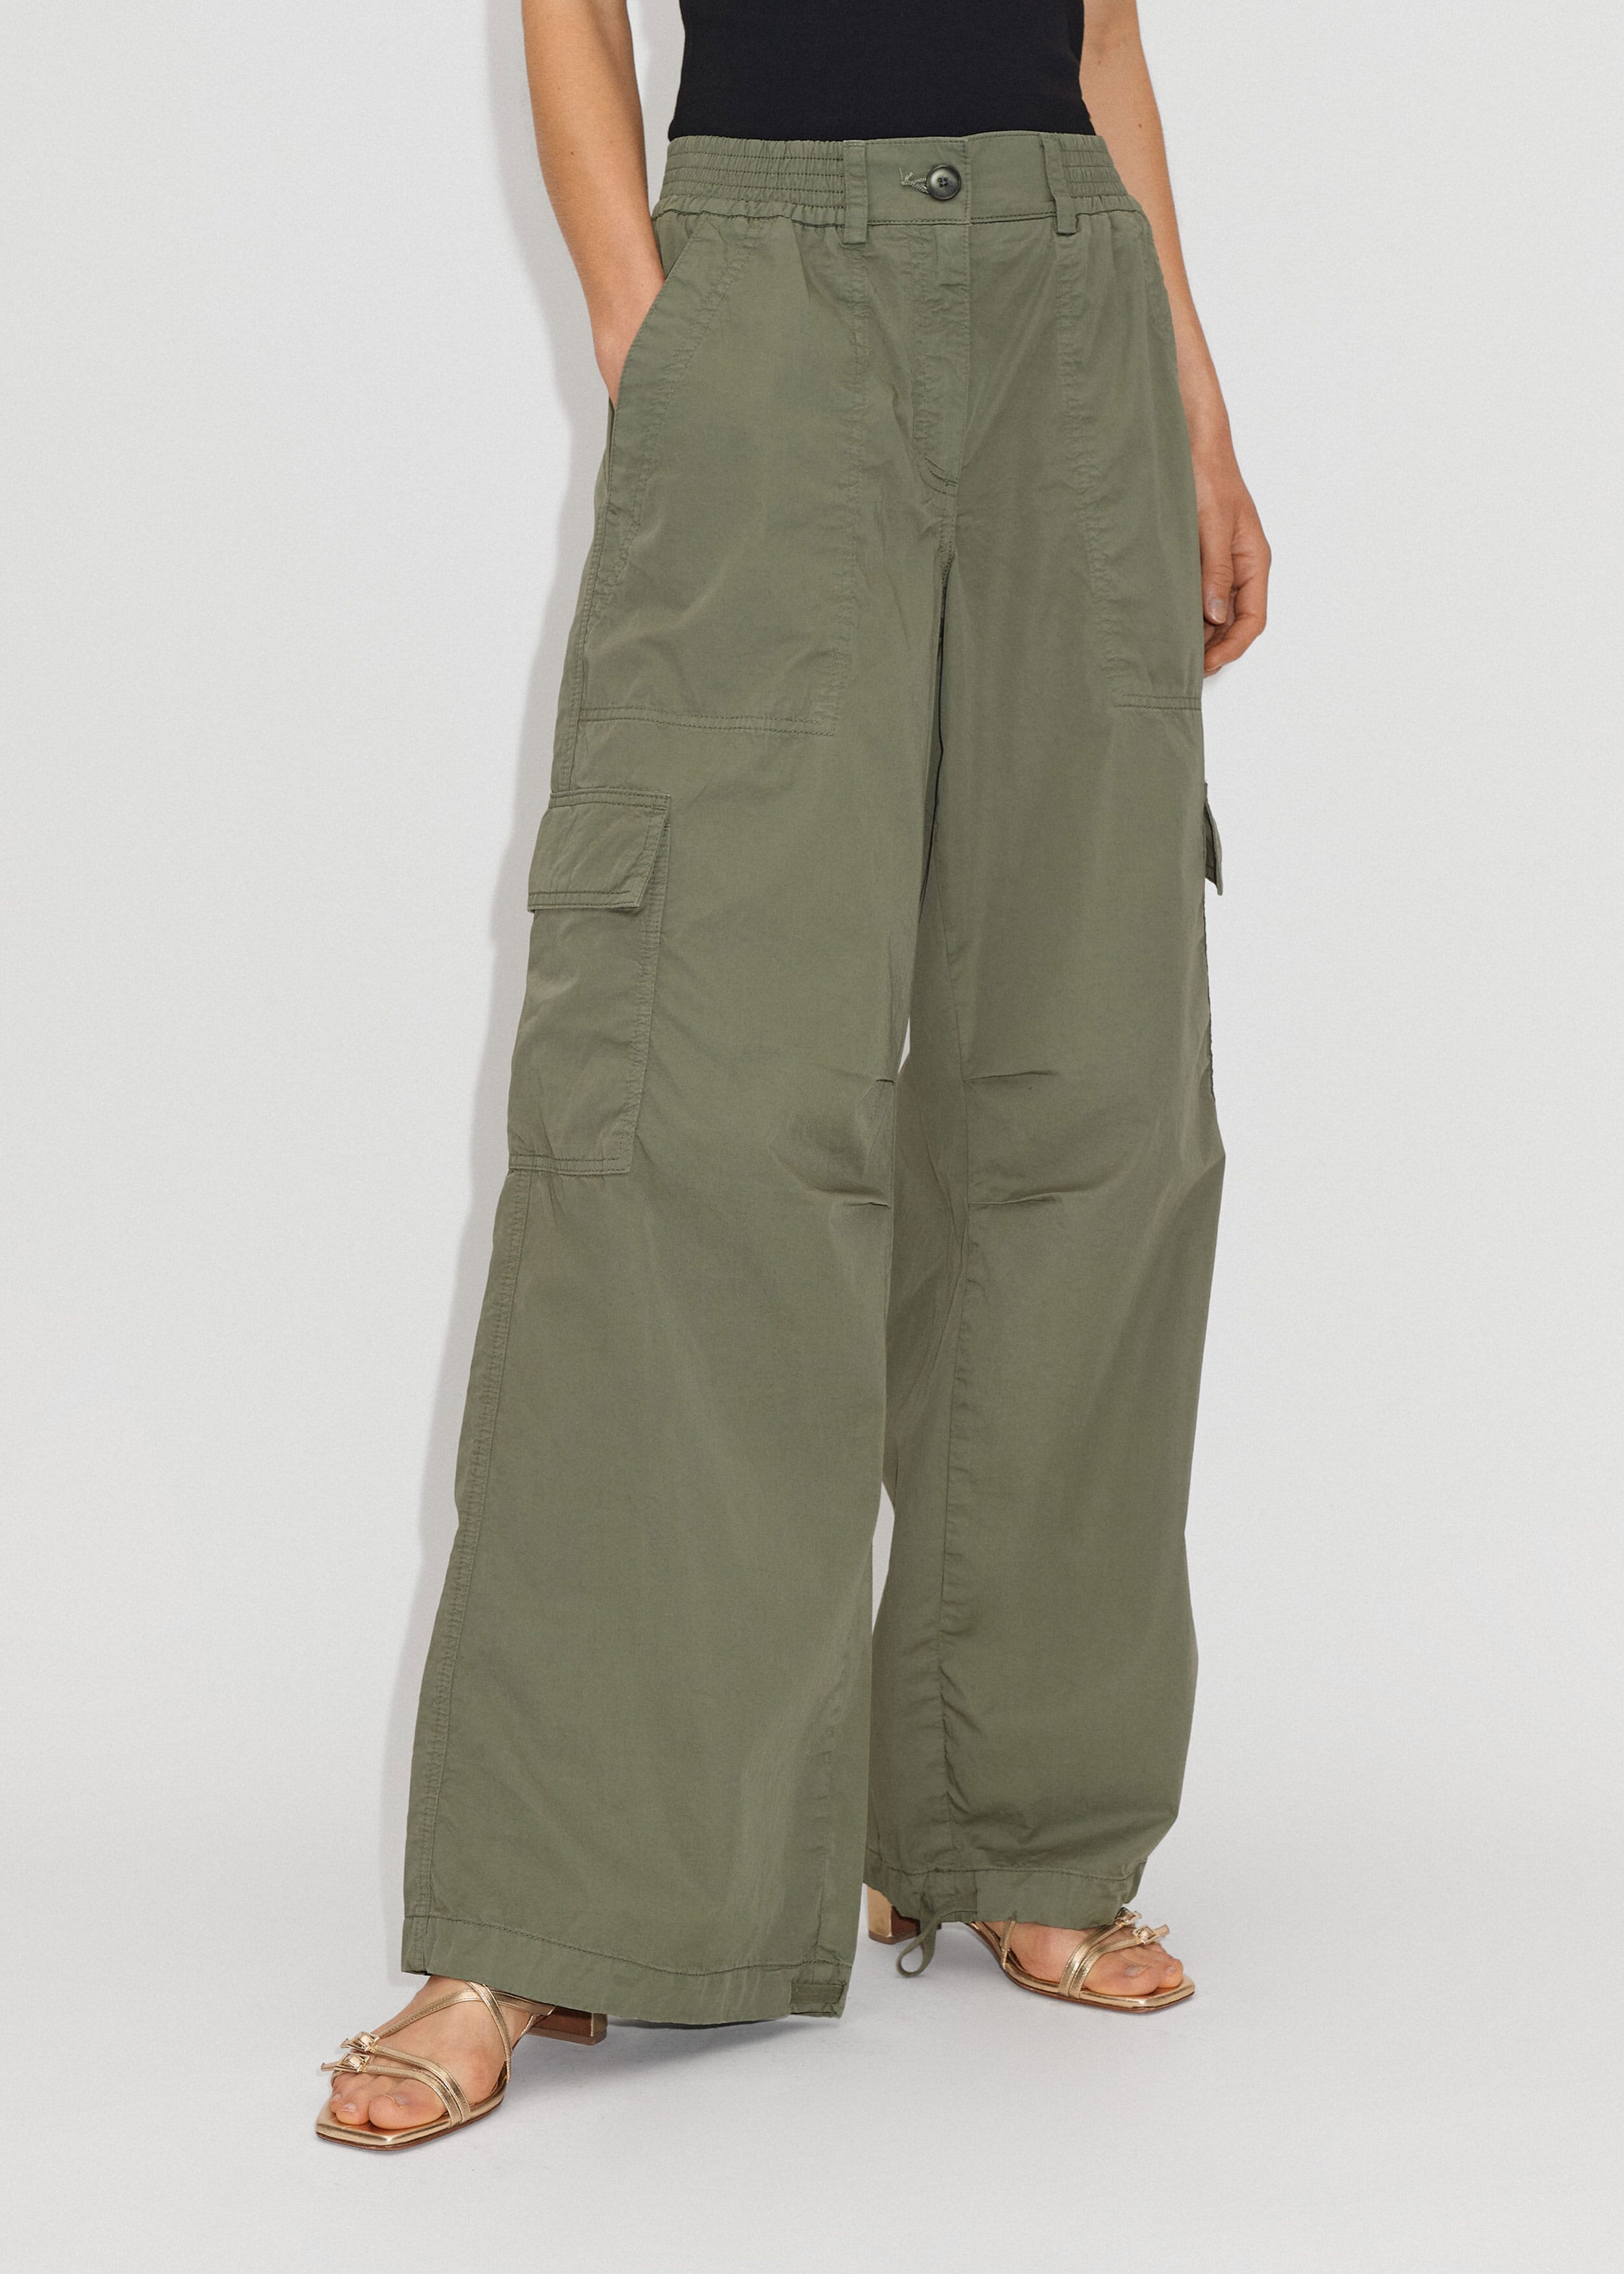 Mer + Em relaxed low-rise khaki cargo trousers are an elevated casual staple boasting our key intelligent design details that elevate the style so that it holds its own with polished tailoring.